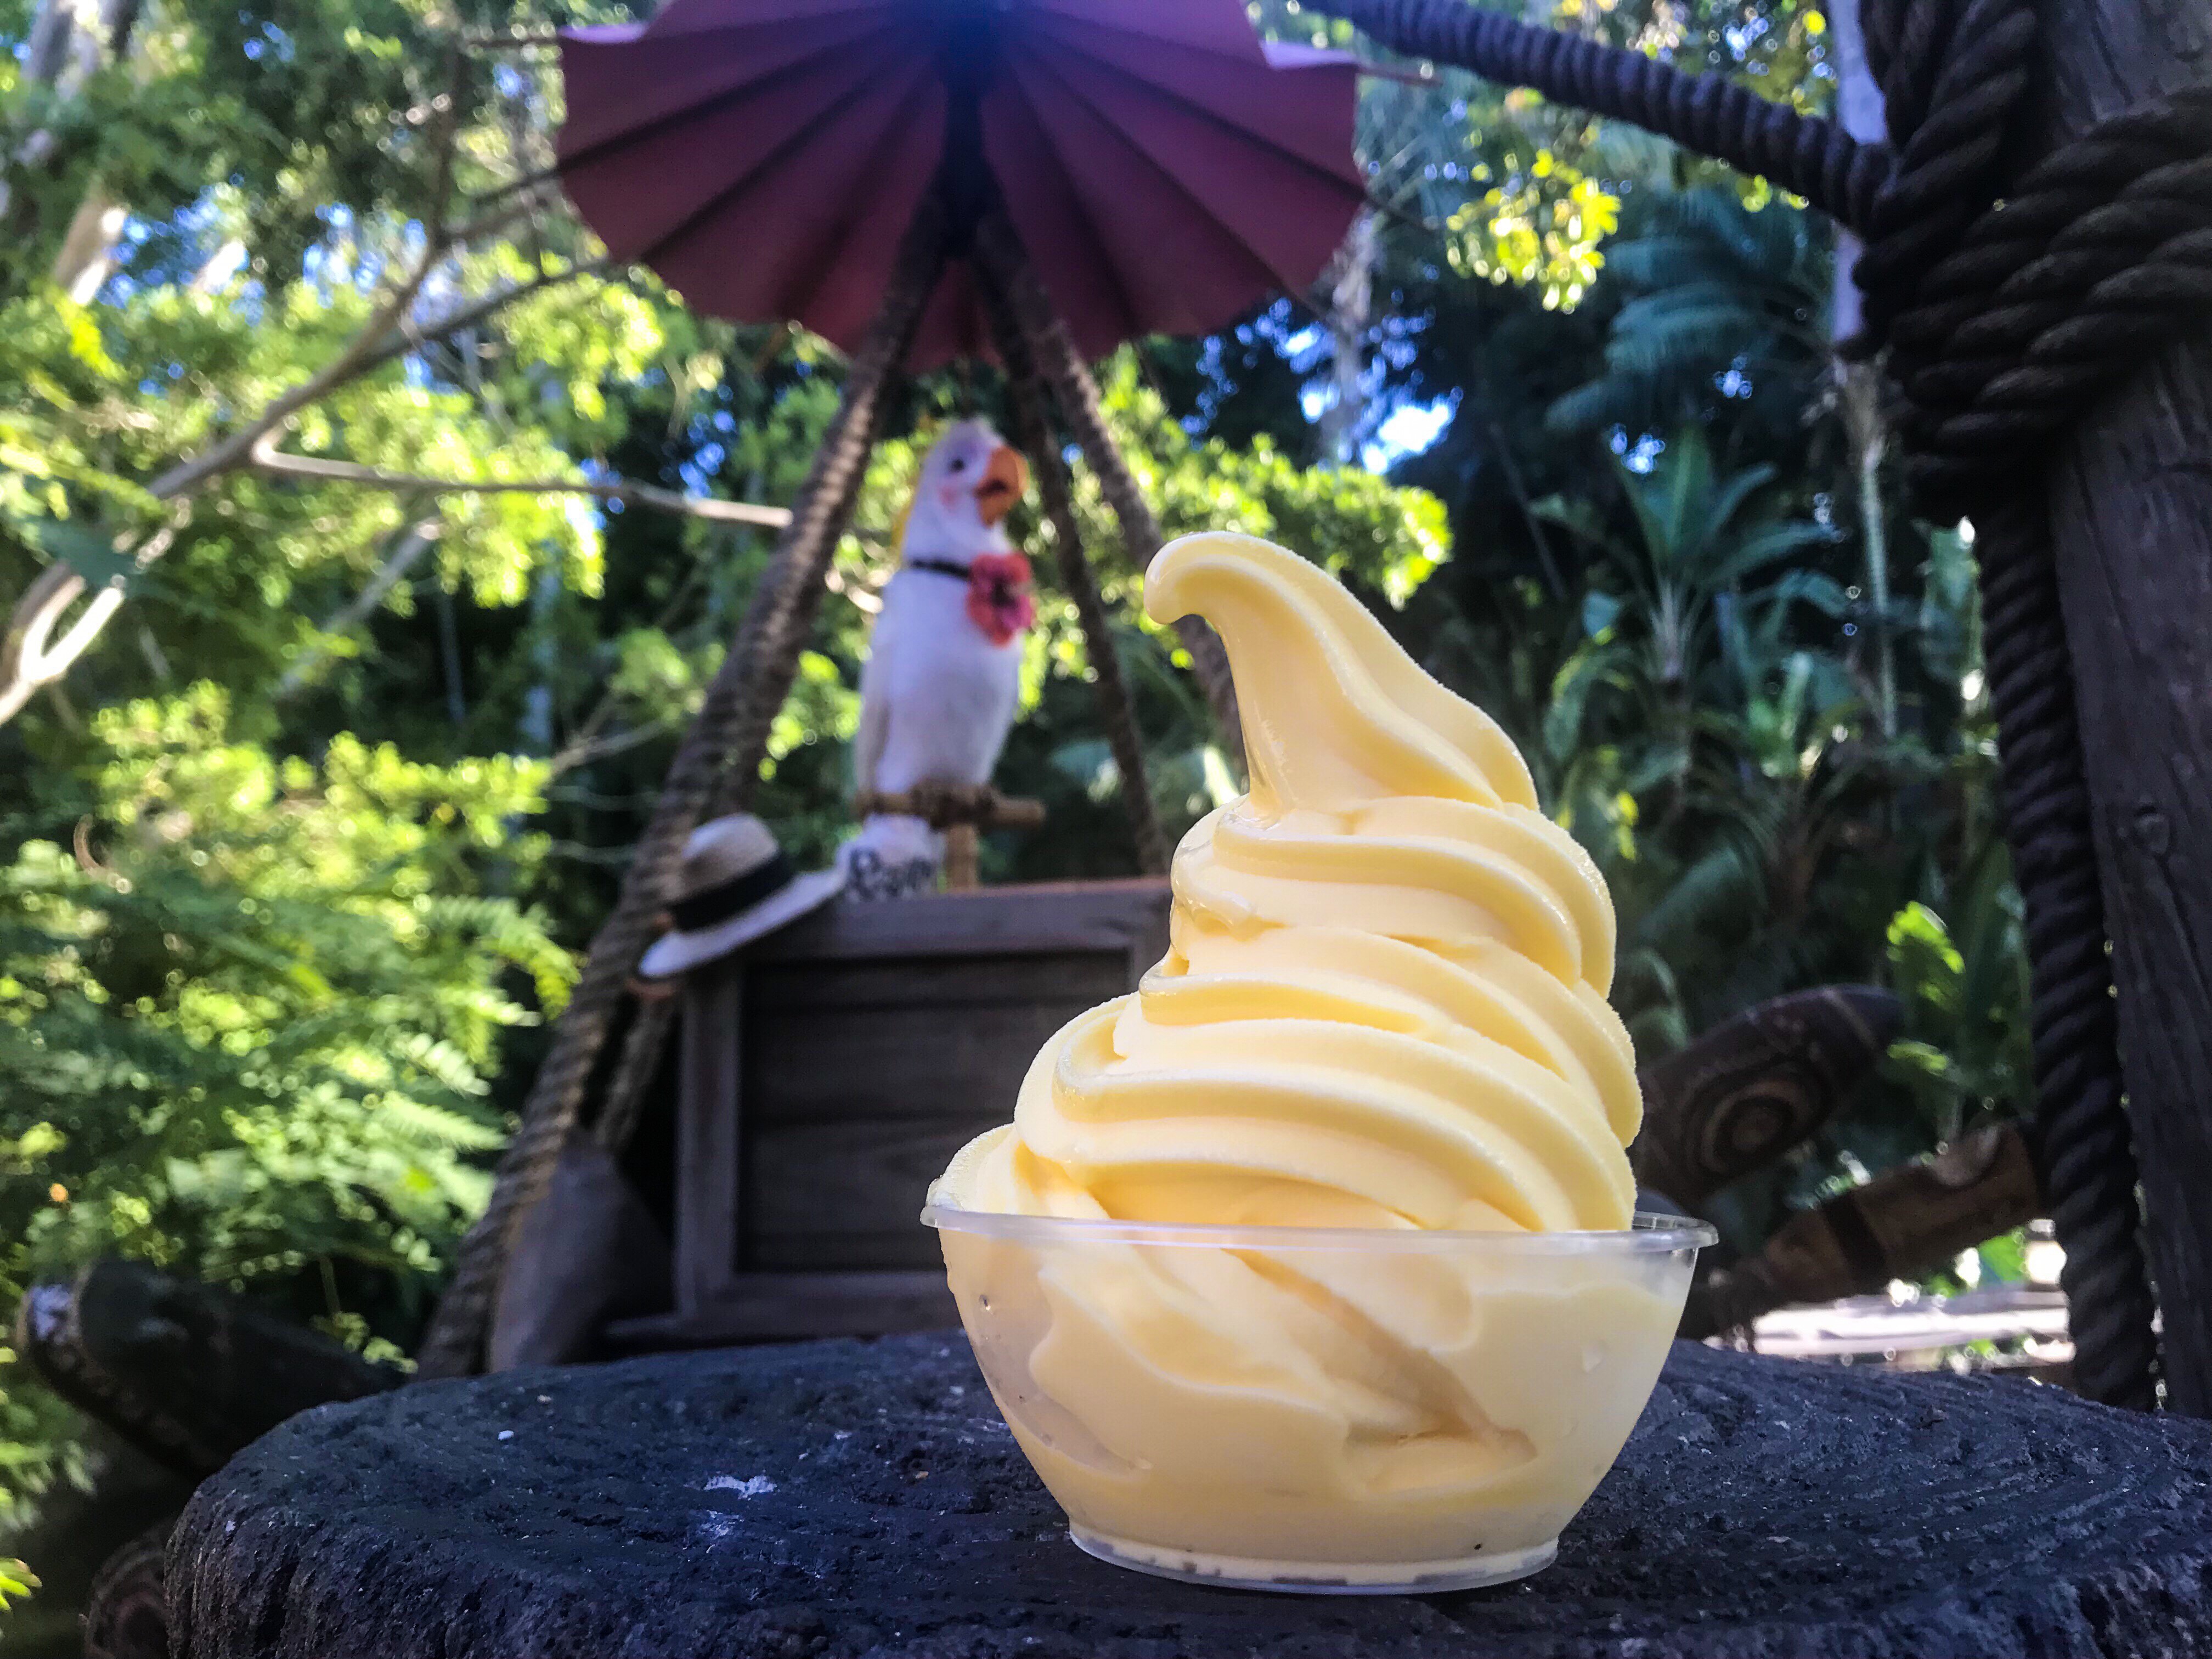 New Mango Pineapple Dole Whip At Tropical Hideaway